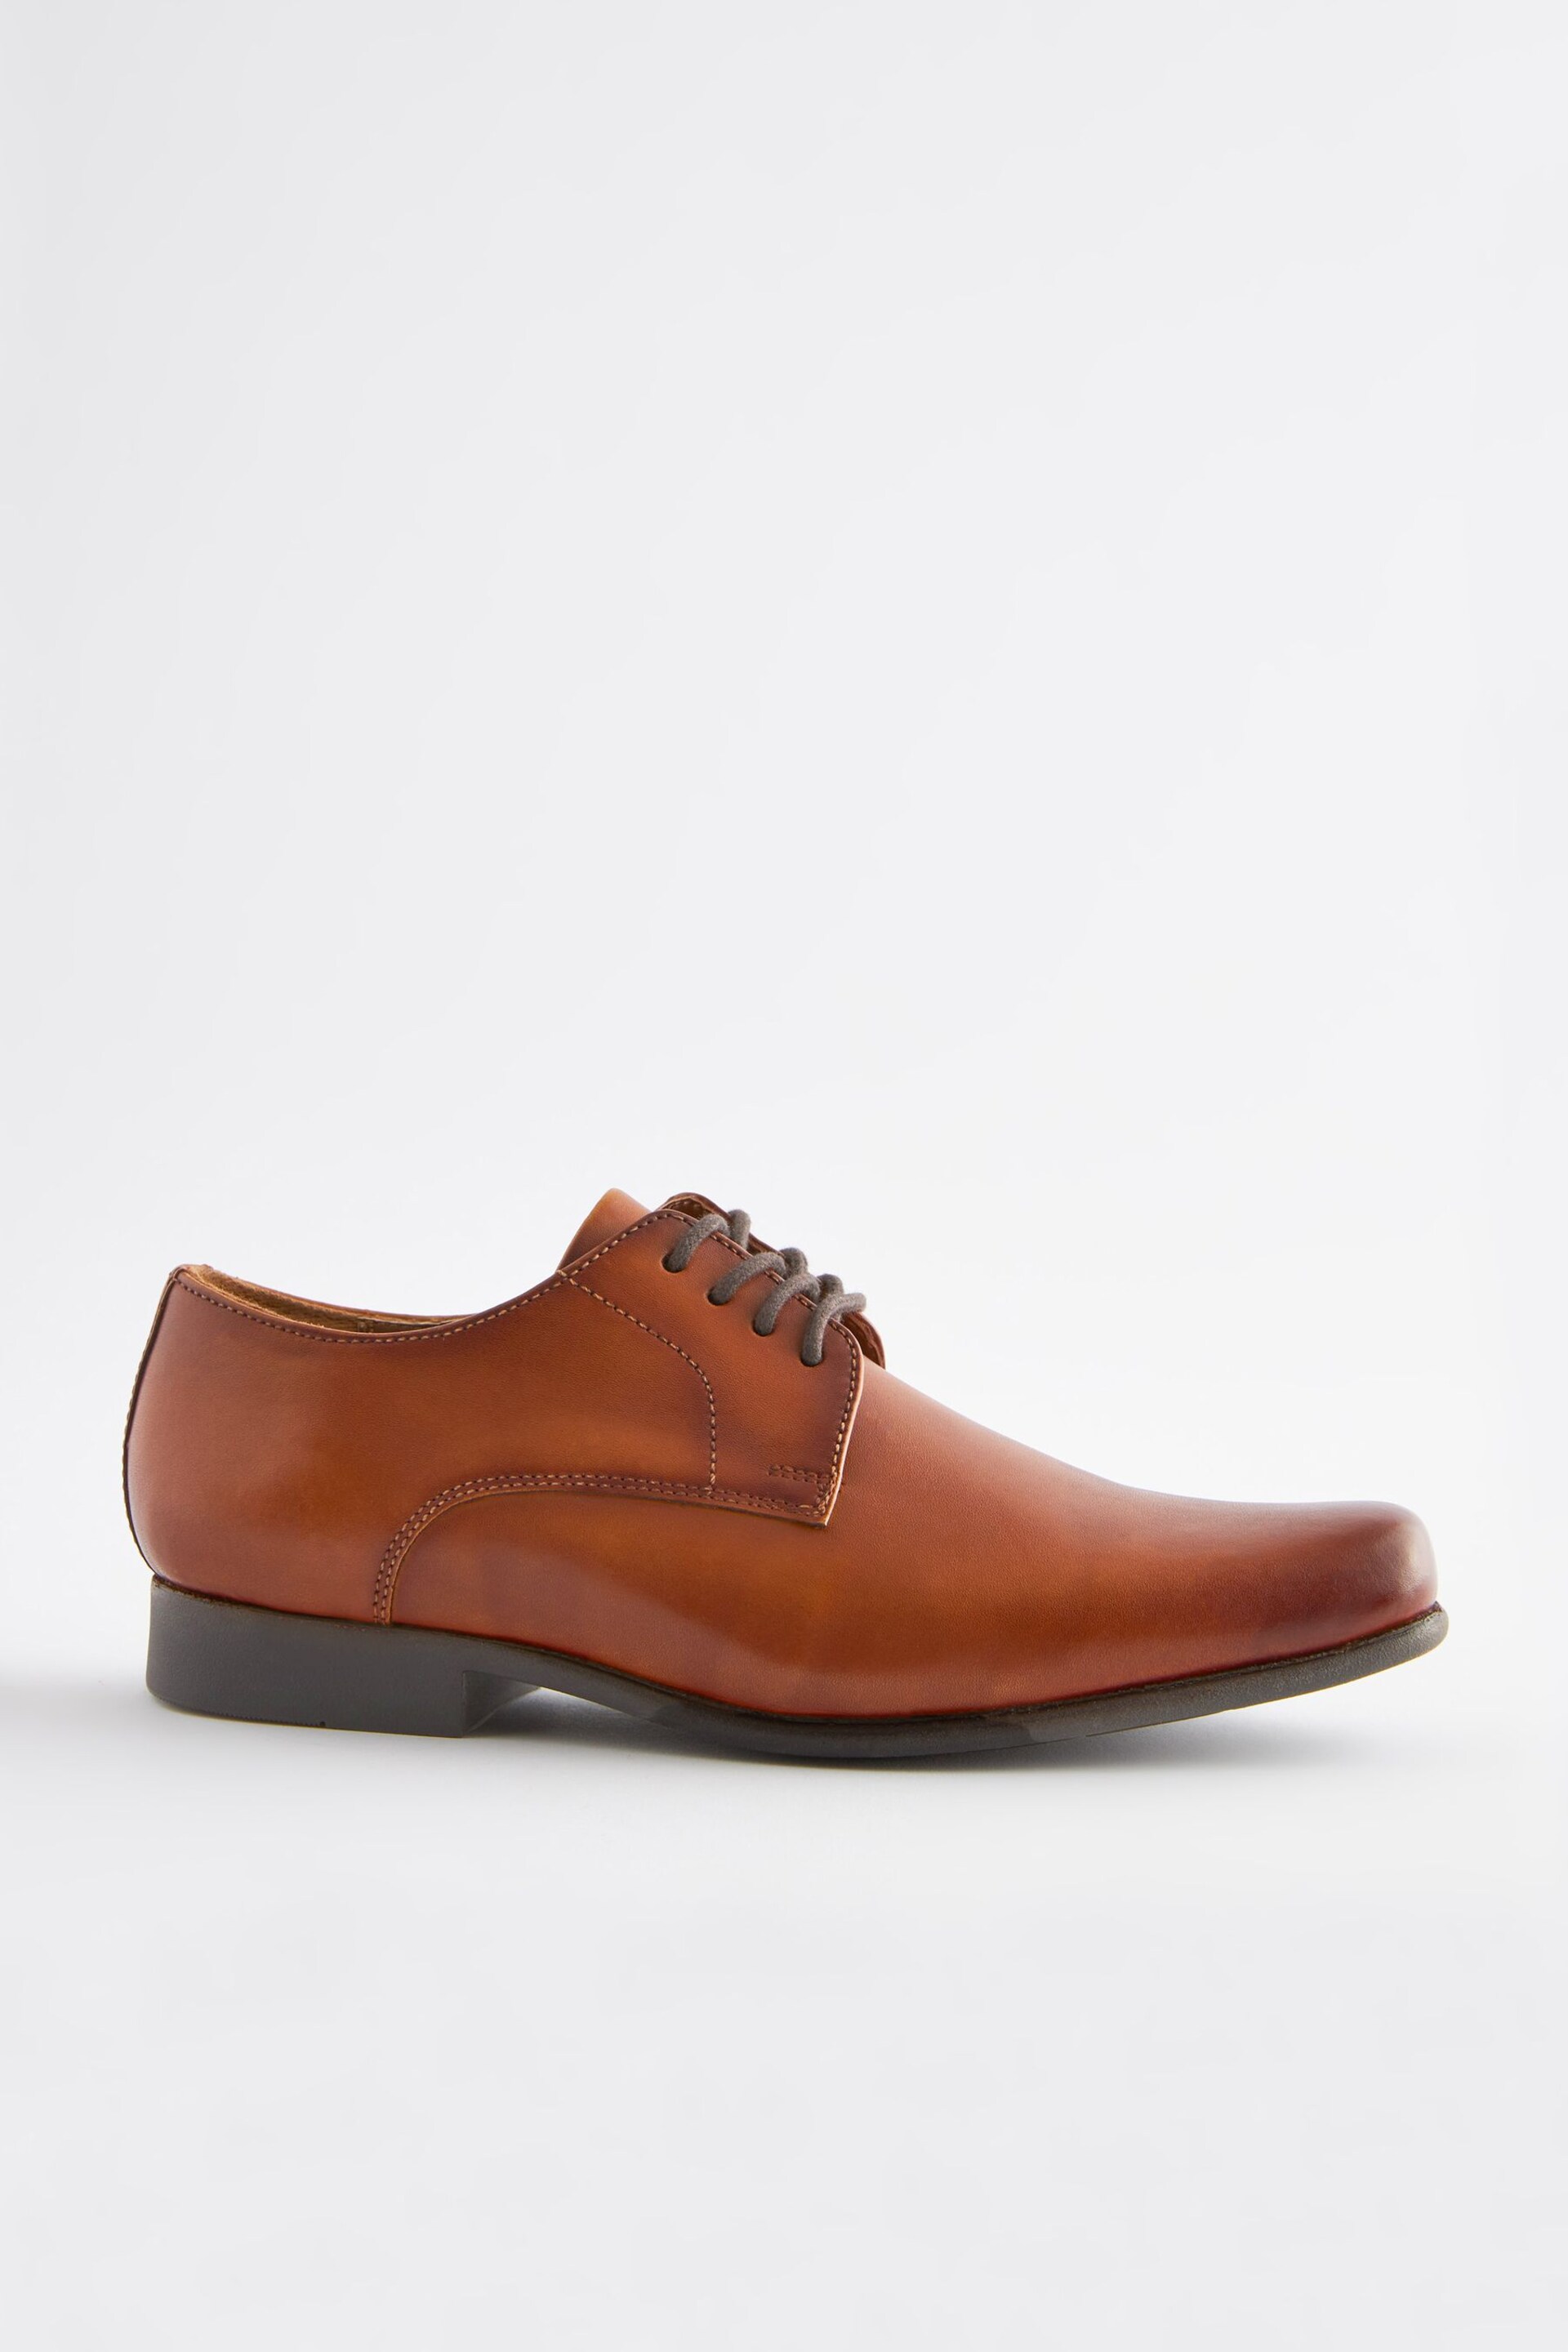 Tan Brown Leather Lace Up Shoes - Image 2 of 6